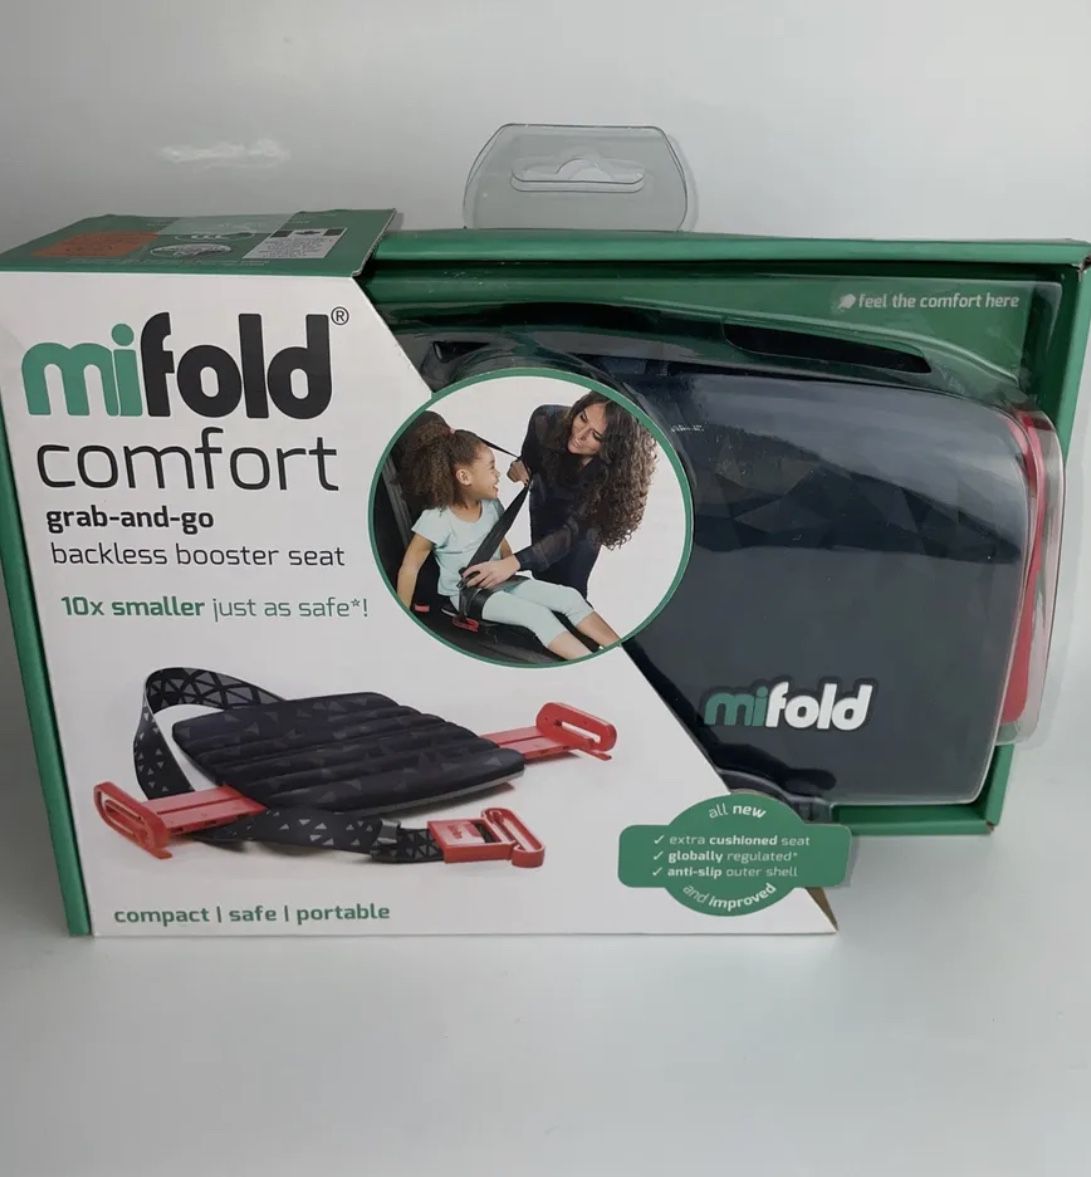 Mifold Grab-and-Go Compact Portable Car Booster Seat Children 33 - 100 Lbs